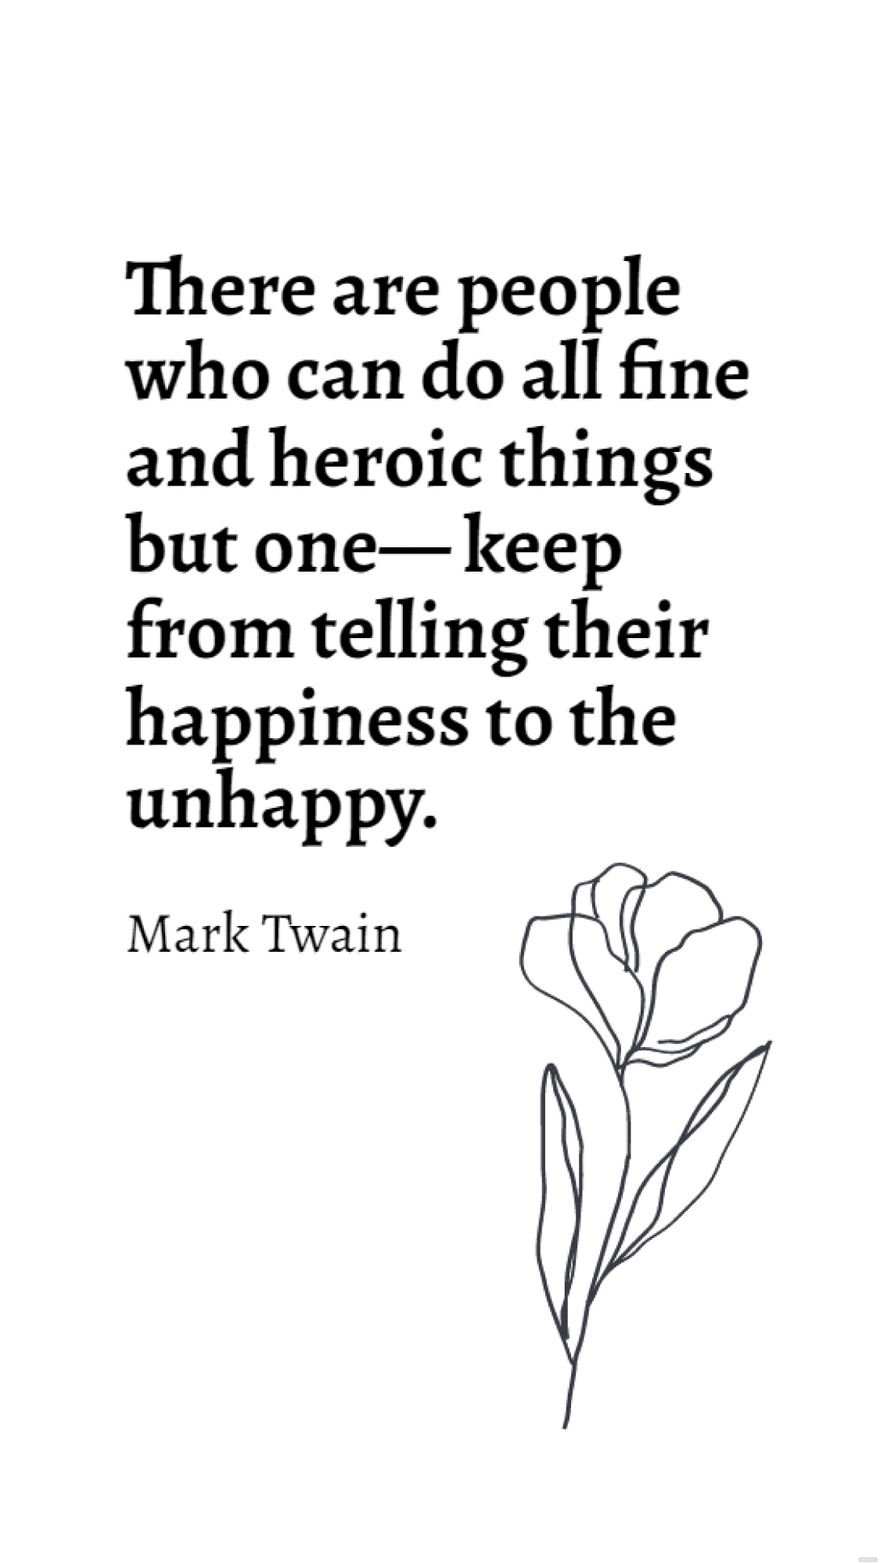 Mark Twain - There are people who can do all fine and heroic things but one - keep from telling their happiness to the unhappy.